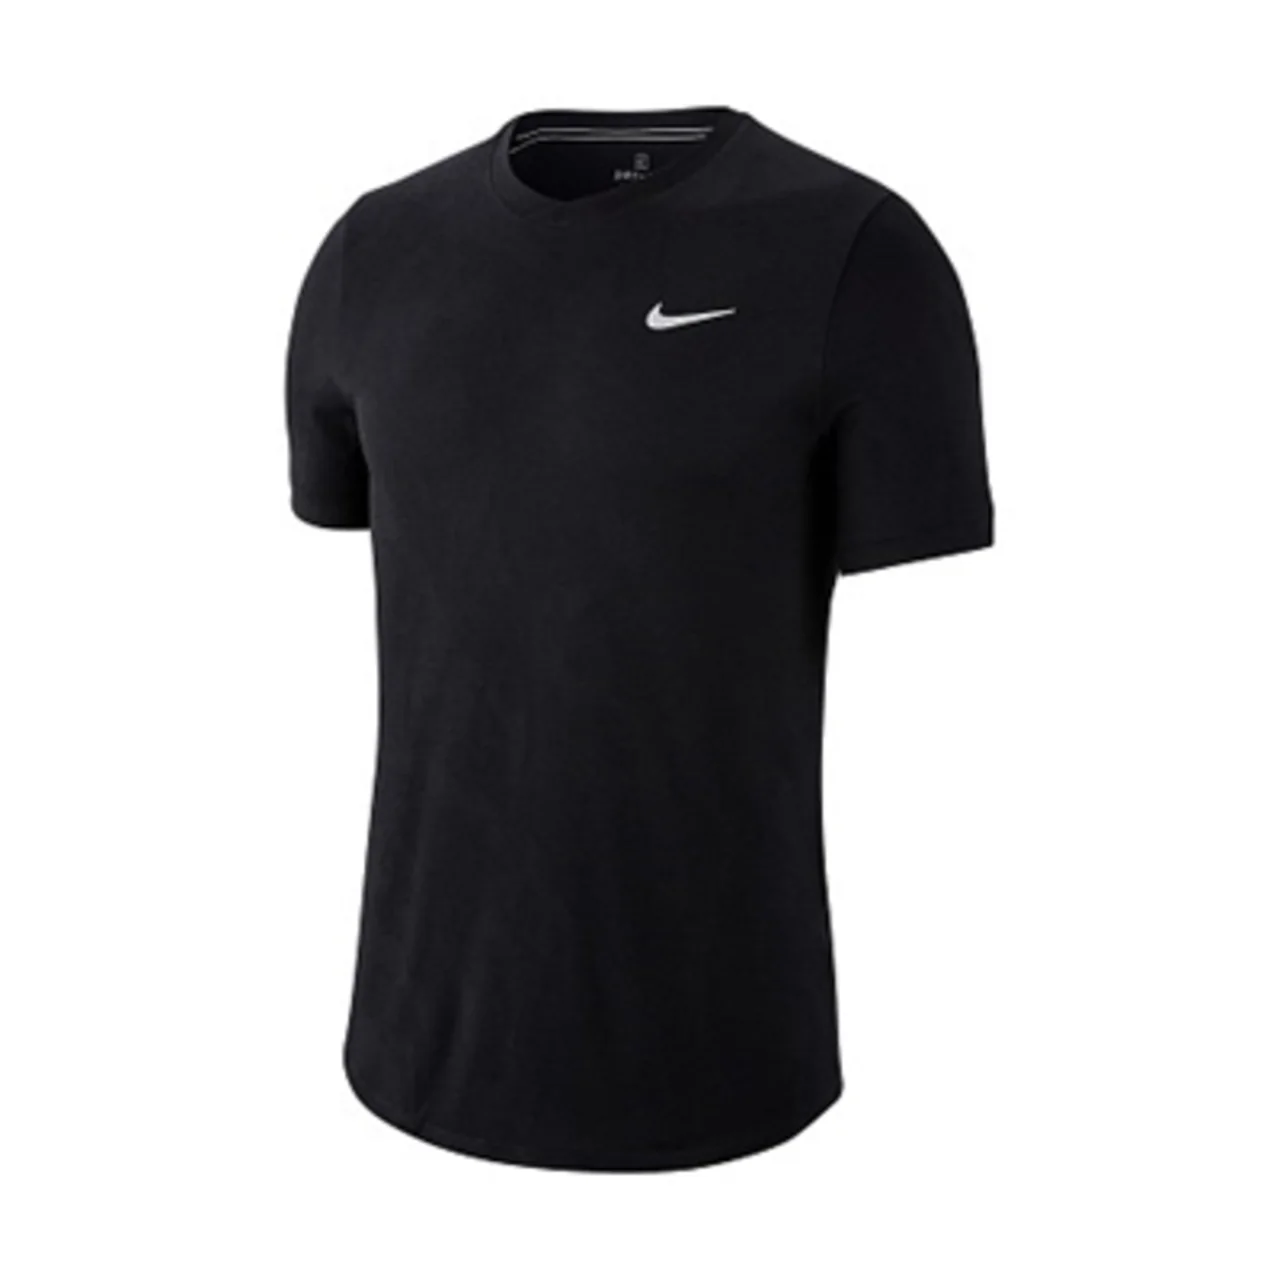 Nike Dry Top Challenger Black/White Size S